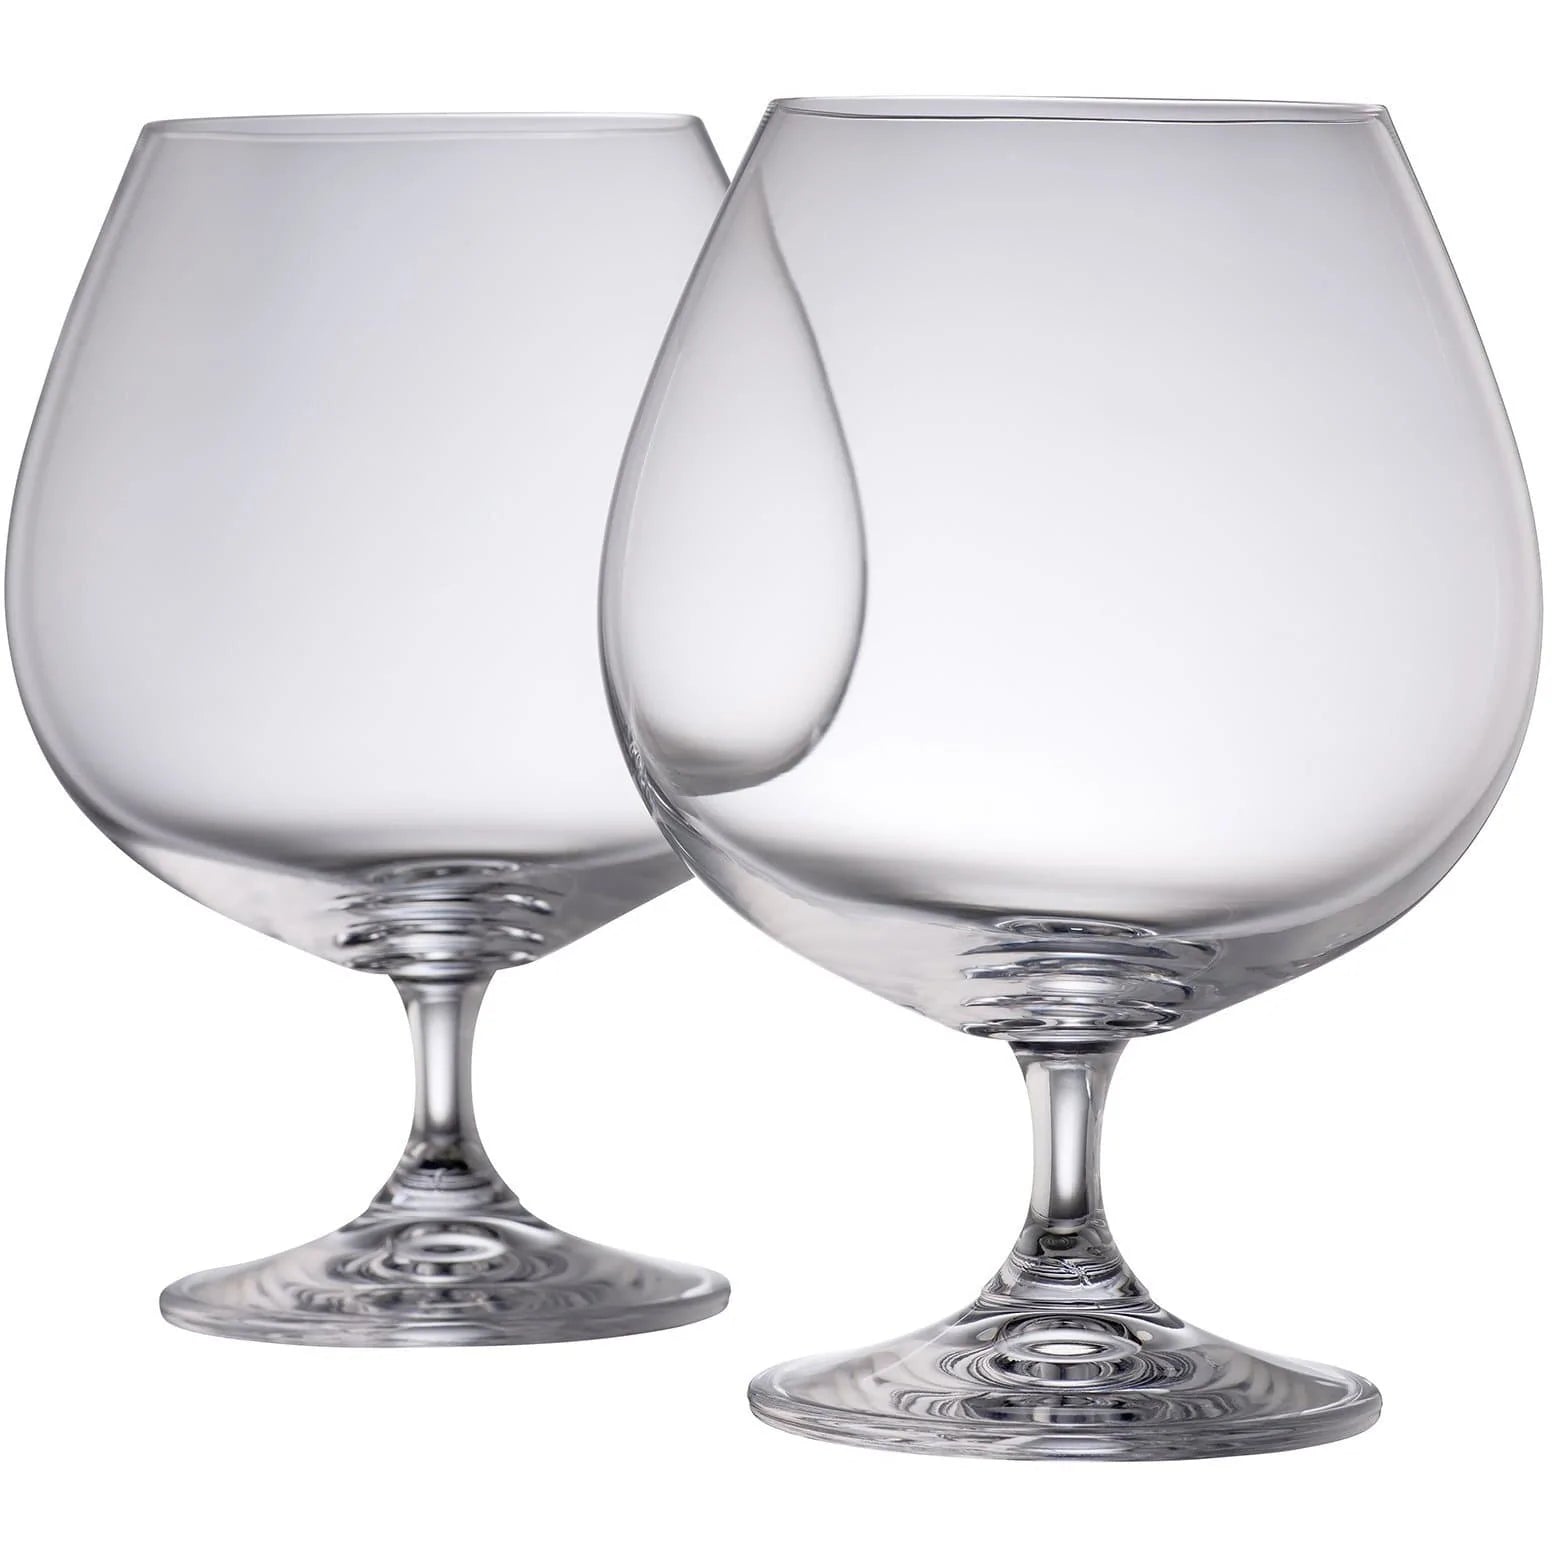 Galway Crystal Irish Crystal Brandy Glass Pair Gifts For Home